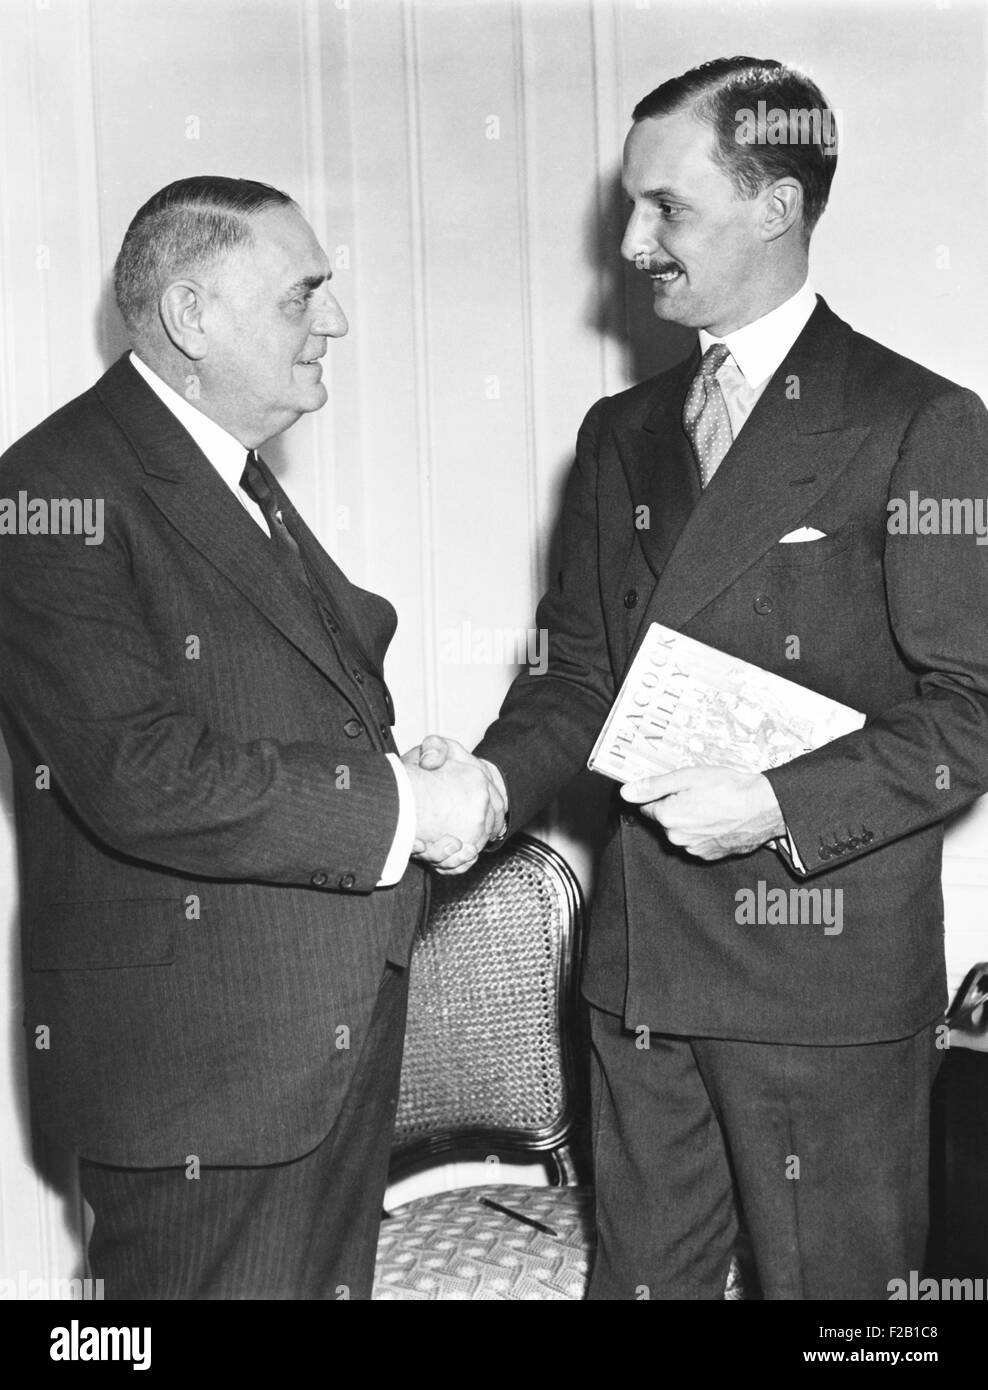 Waldorf Astor (right), grandson of William Waldorf Astor in New York, Oct 23, 1933. He is welcomed to the Waldorf Astoria Hotel Stock Photo